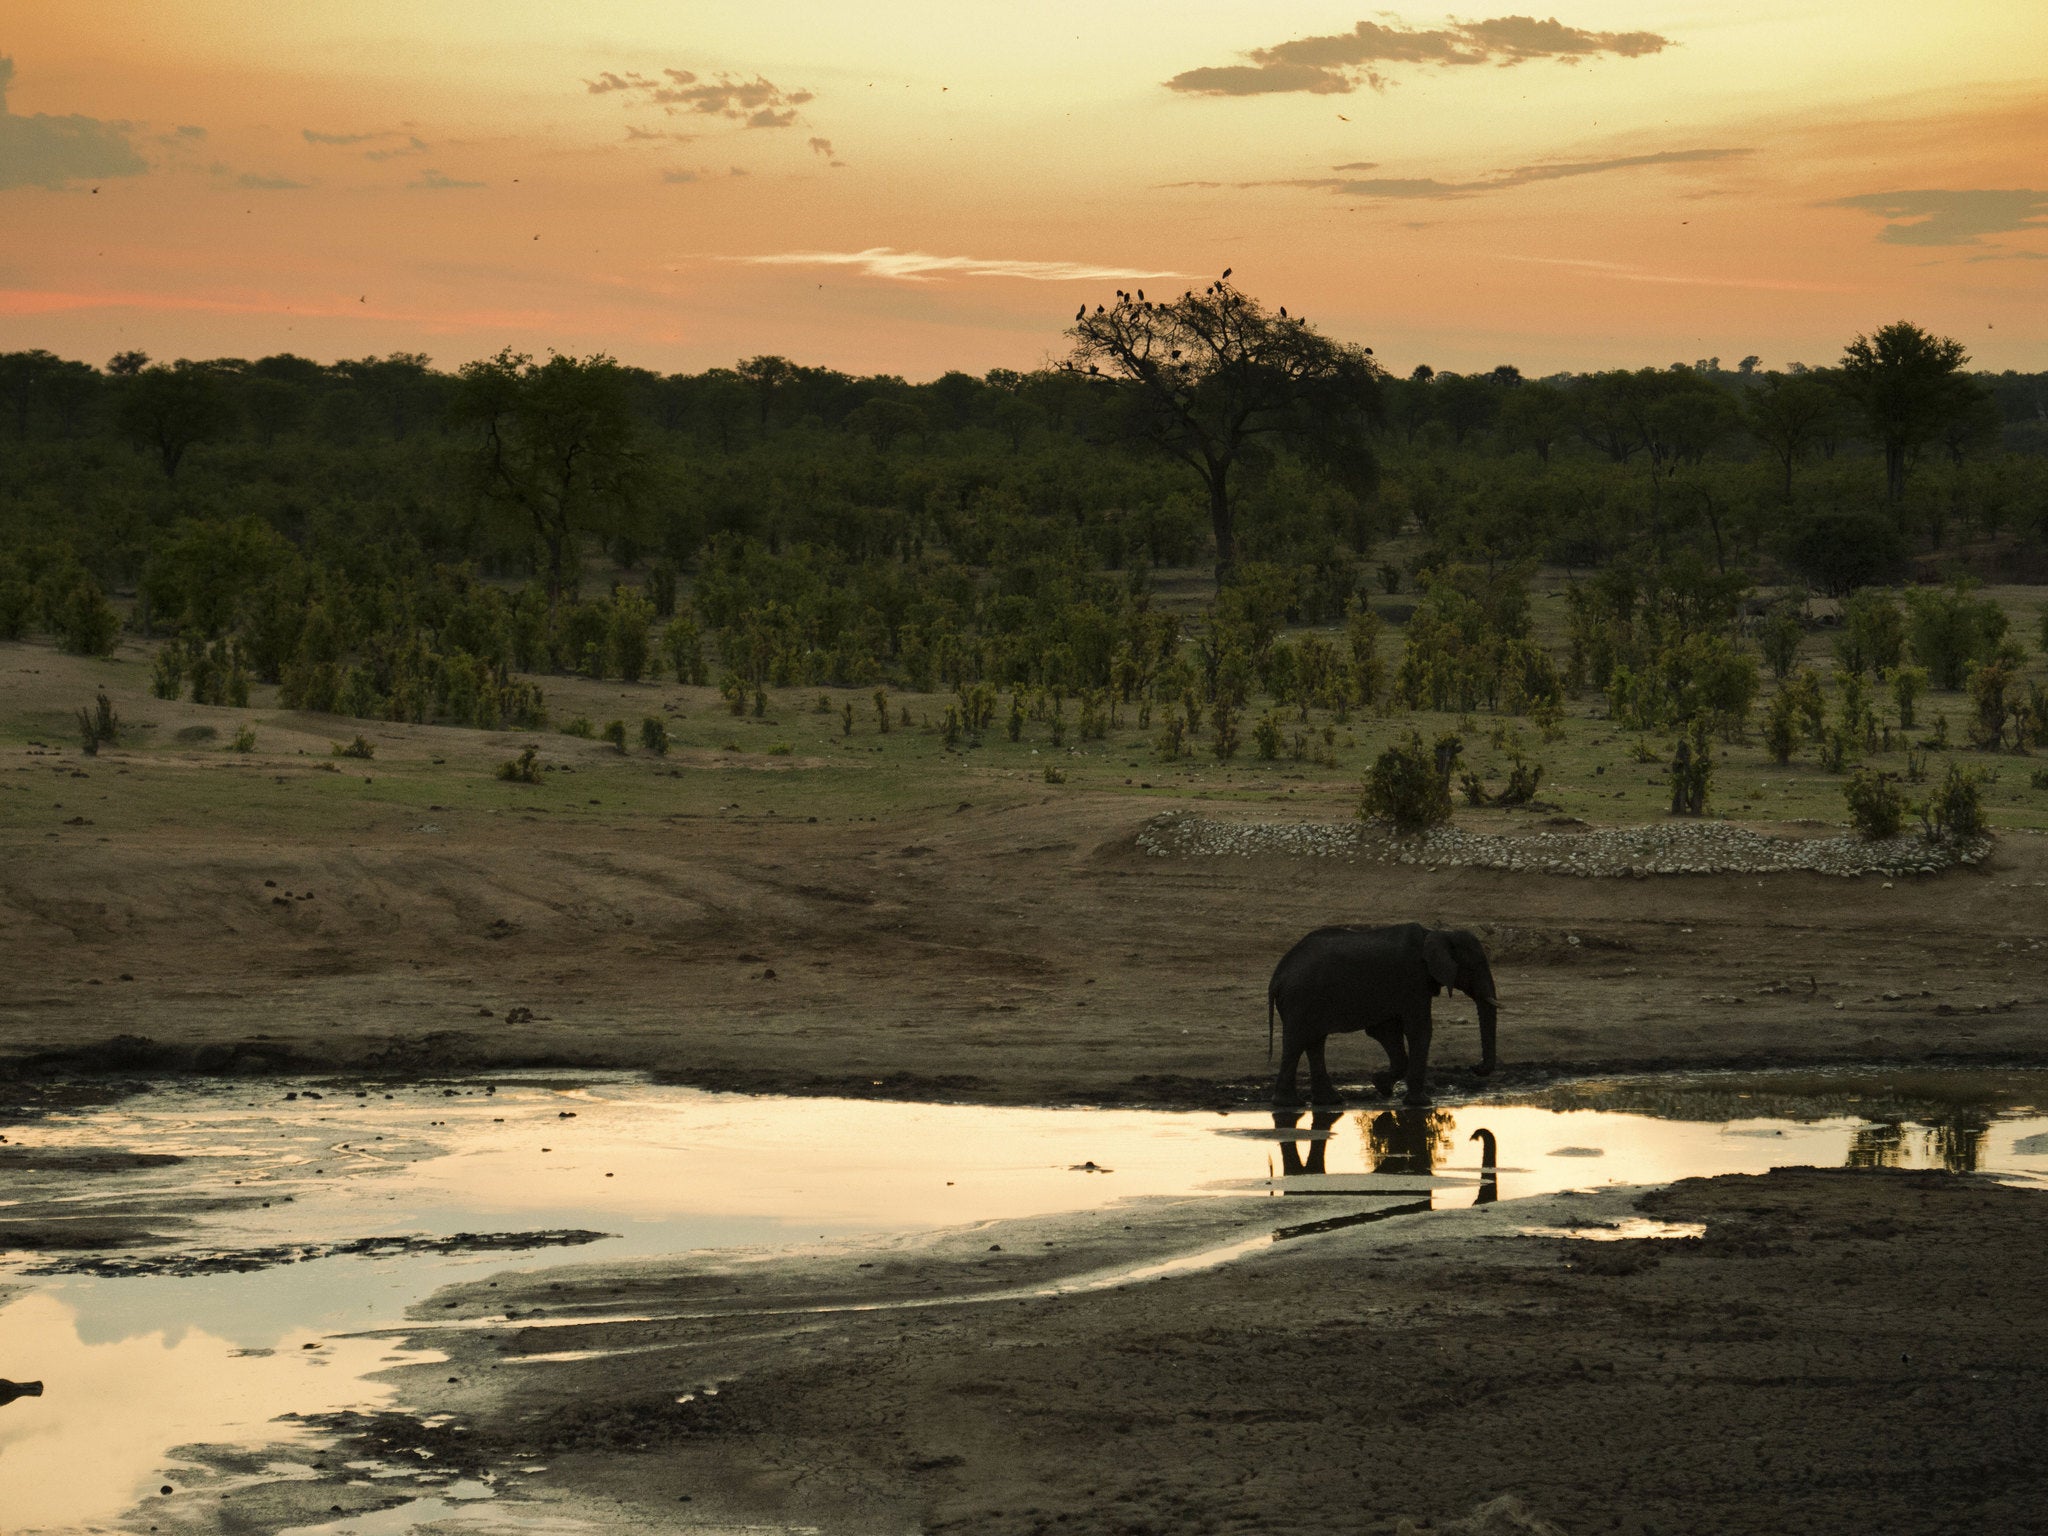 Cecil lived in Hwange National Park, where he was well-known and loved by locals and visitors